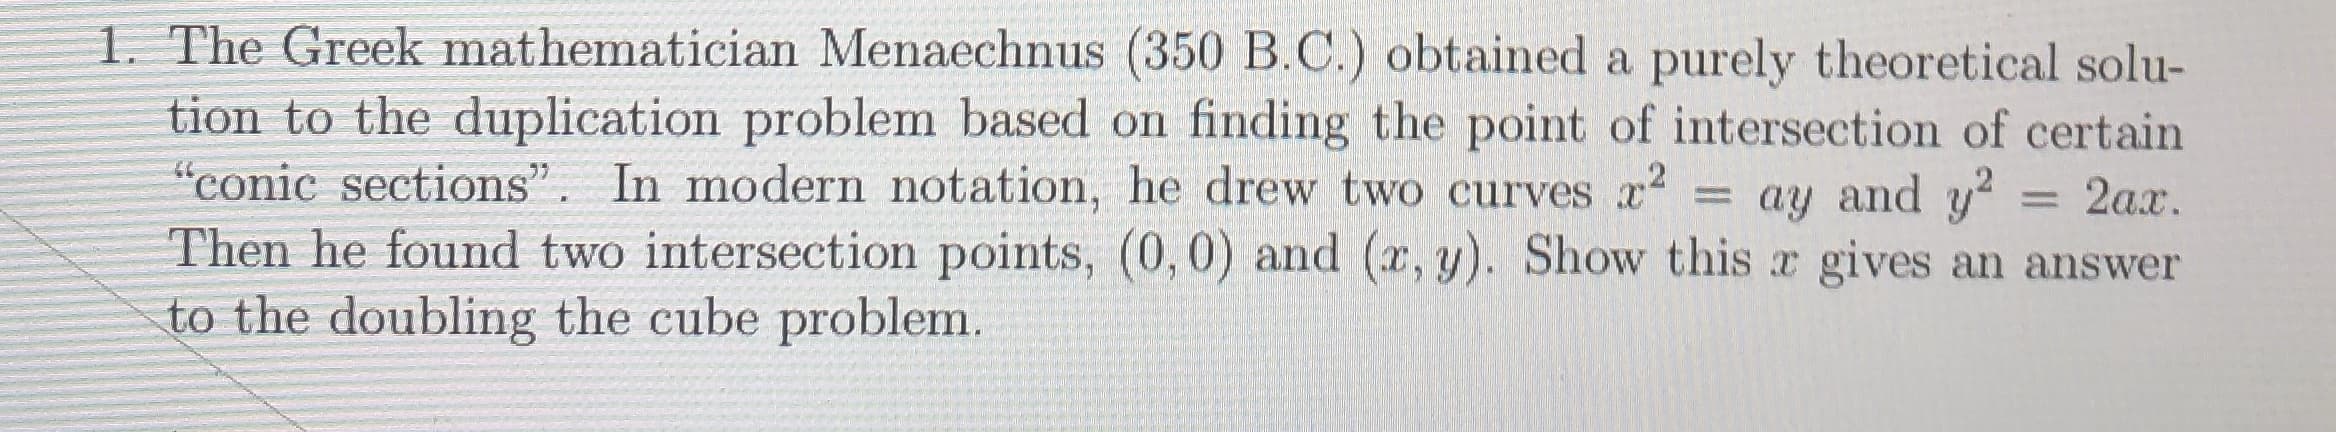 1. The Greek mathematician Menaechnus (350 B.C.) obtained a purely theoretical solu-
tion to the duplication problem based on
"conic sections". In modern notation, he drew two curves x2
Then he found two intersection points, (0,0) and (x,y). Show this x gives an answer
to the doubling the cube problem.
finding the point of intersection of certain
ay and y2
2ax.
